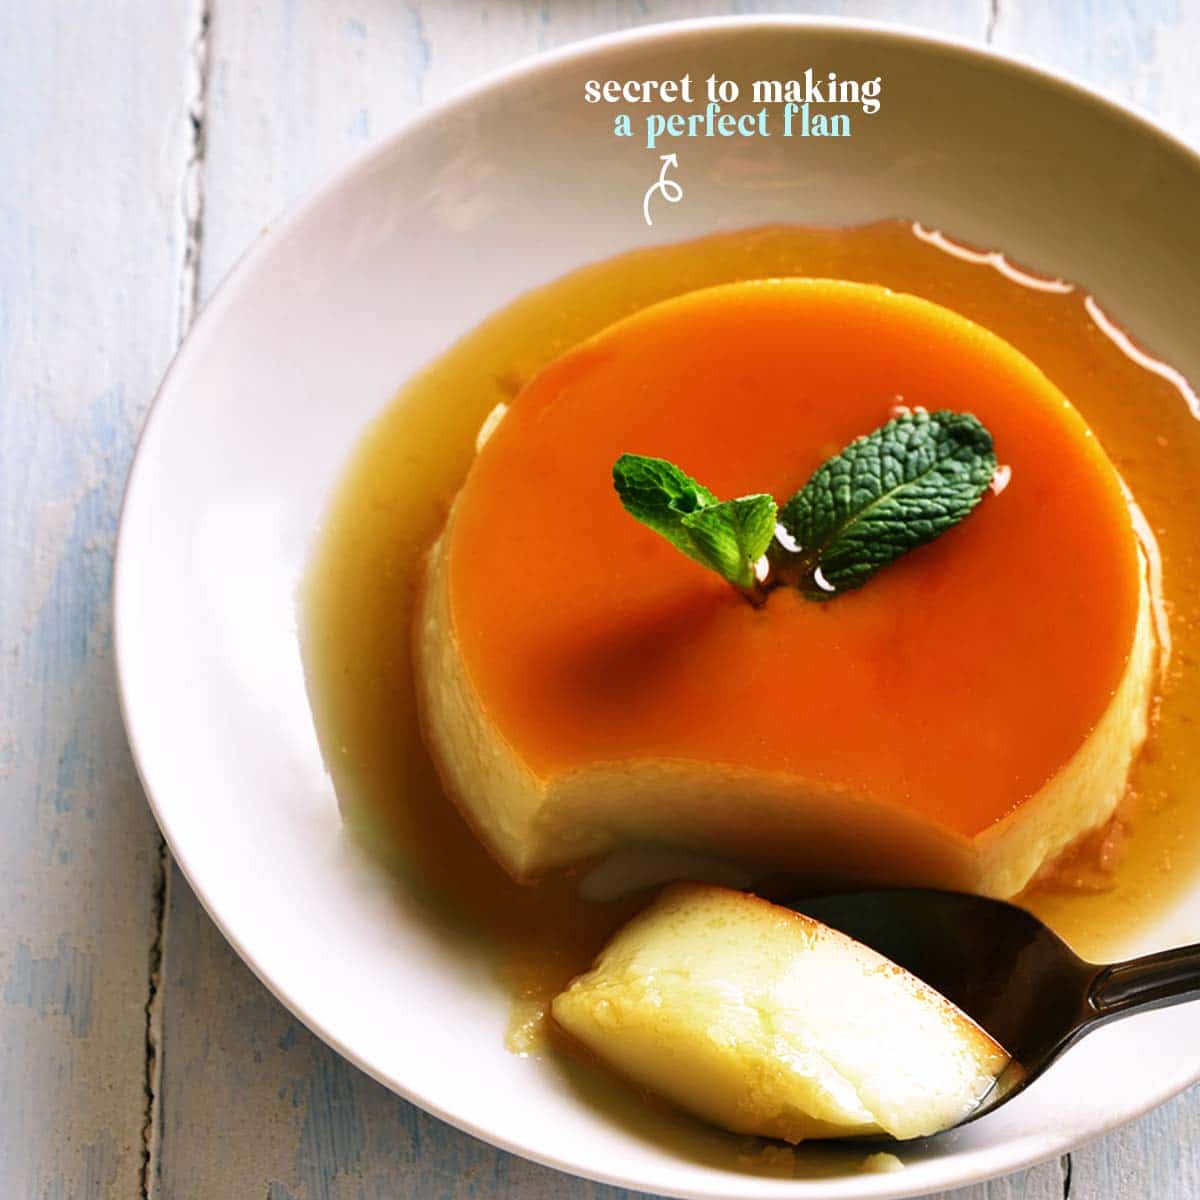 The last thing you want is an overcooked flan. Making this timeless dessert is not about discovering the right recipe. It is more about mastering the technique that results in a silky smooth, creamy flan.